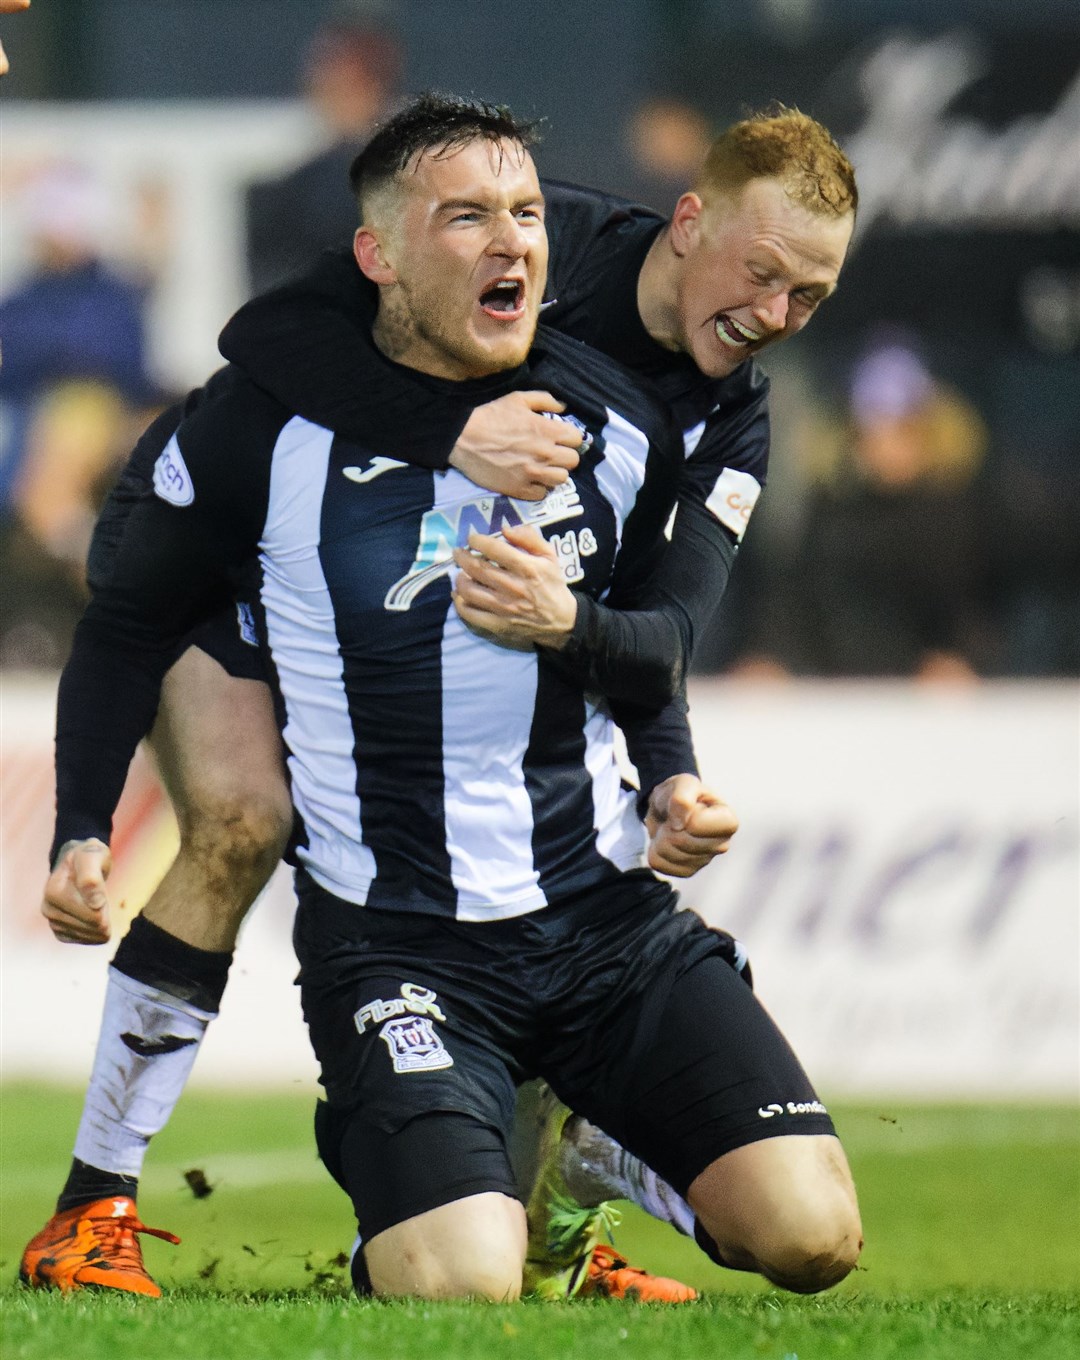 Darryl McHardy (left) celebrates Elgin City's dramatic equaliser against Stenhousemuir with team-mate Russell Dingwall. Photo: Bob Crombie